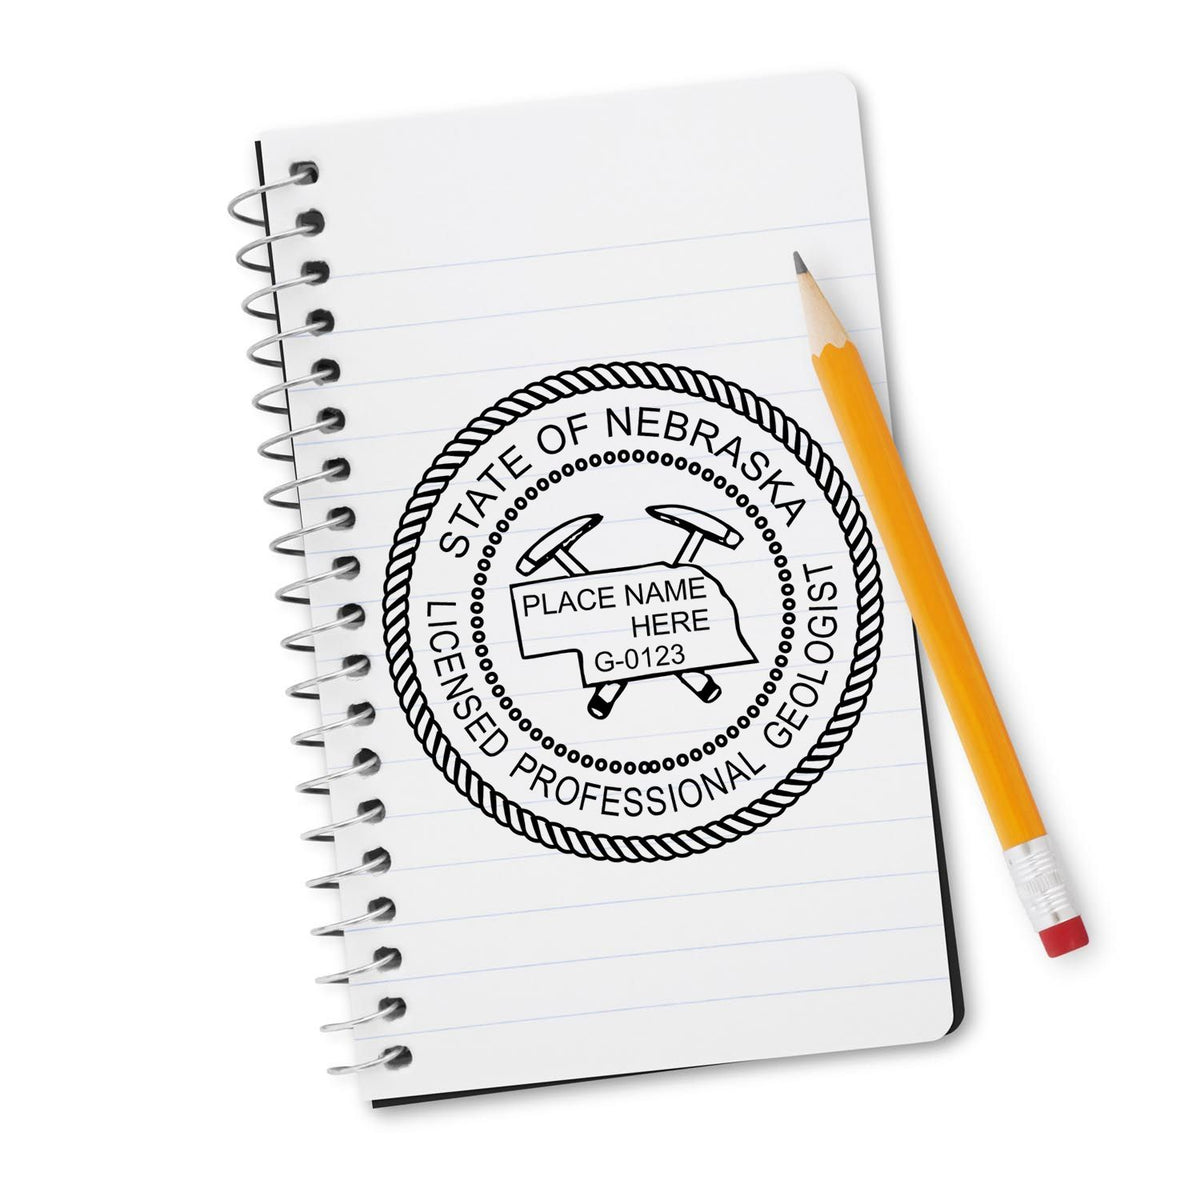 A lifestyle photo showing a stamped image of the Slim Pre-Inked Nebraska Professional Geologist Seal Stamp on a piece of paper